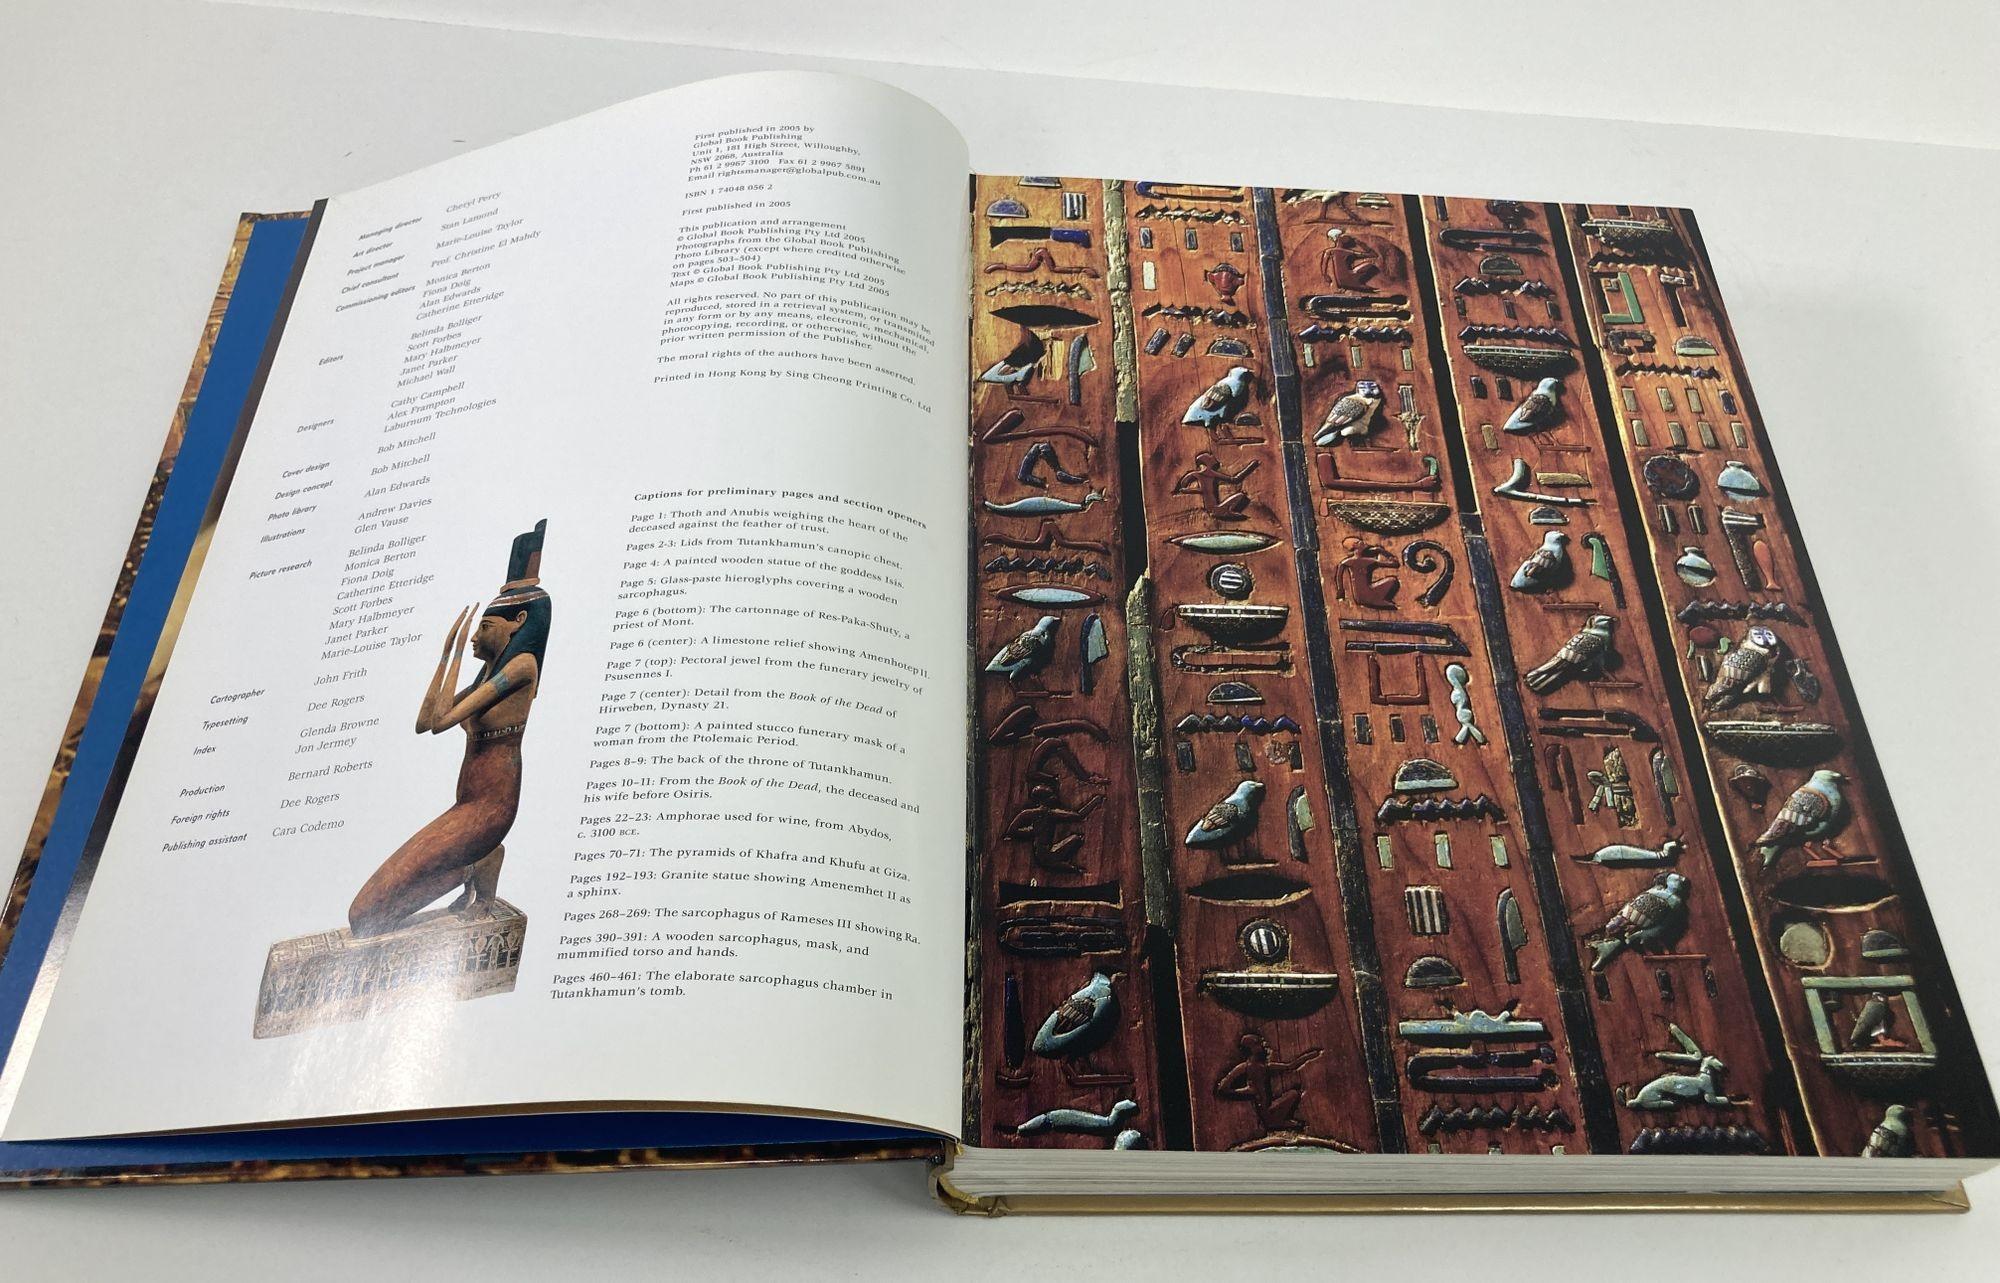 Egyptian Egypt: Land and Lives of the Pharaohs Revealed Hardcover Book by Cheryl Perry For Sale